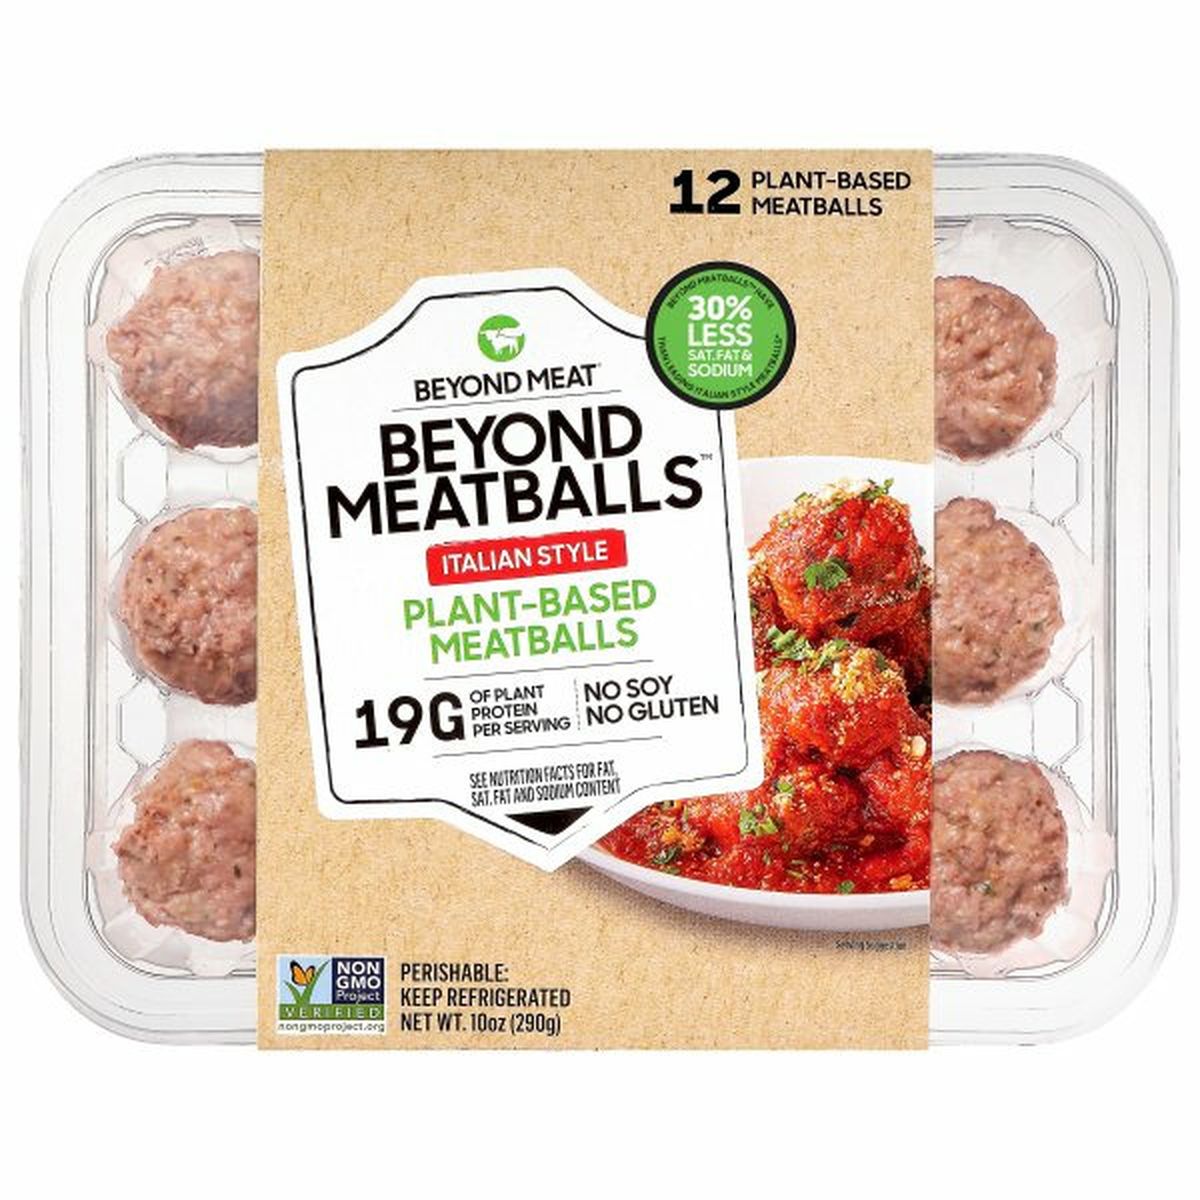 Calories in Beyond Meat balls Meatballs, Plant-Based, Italian Style